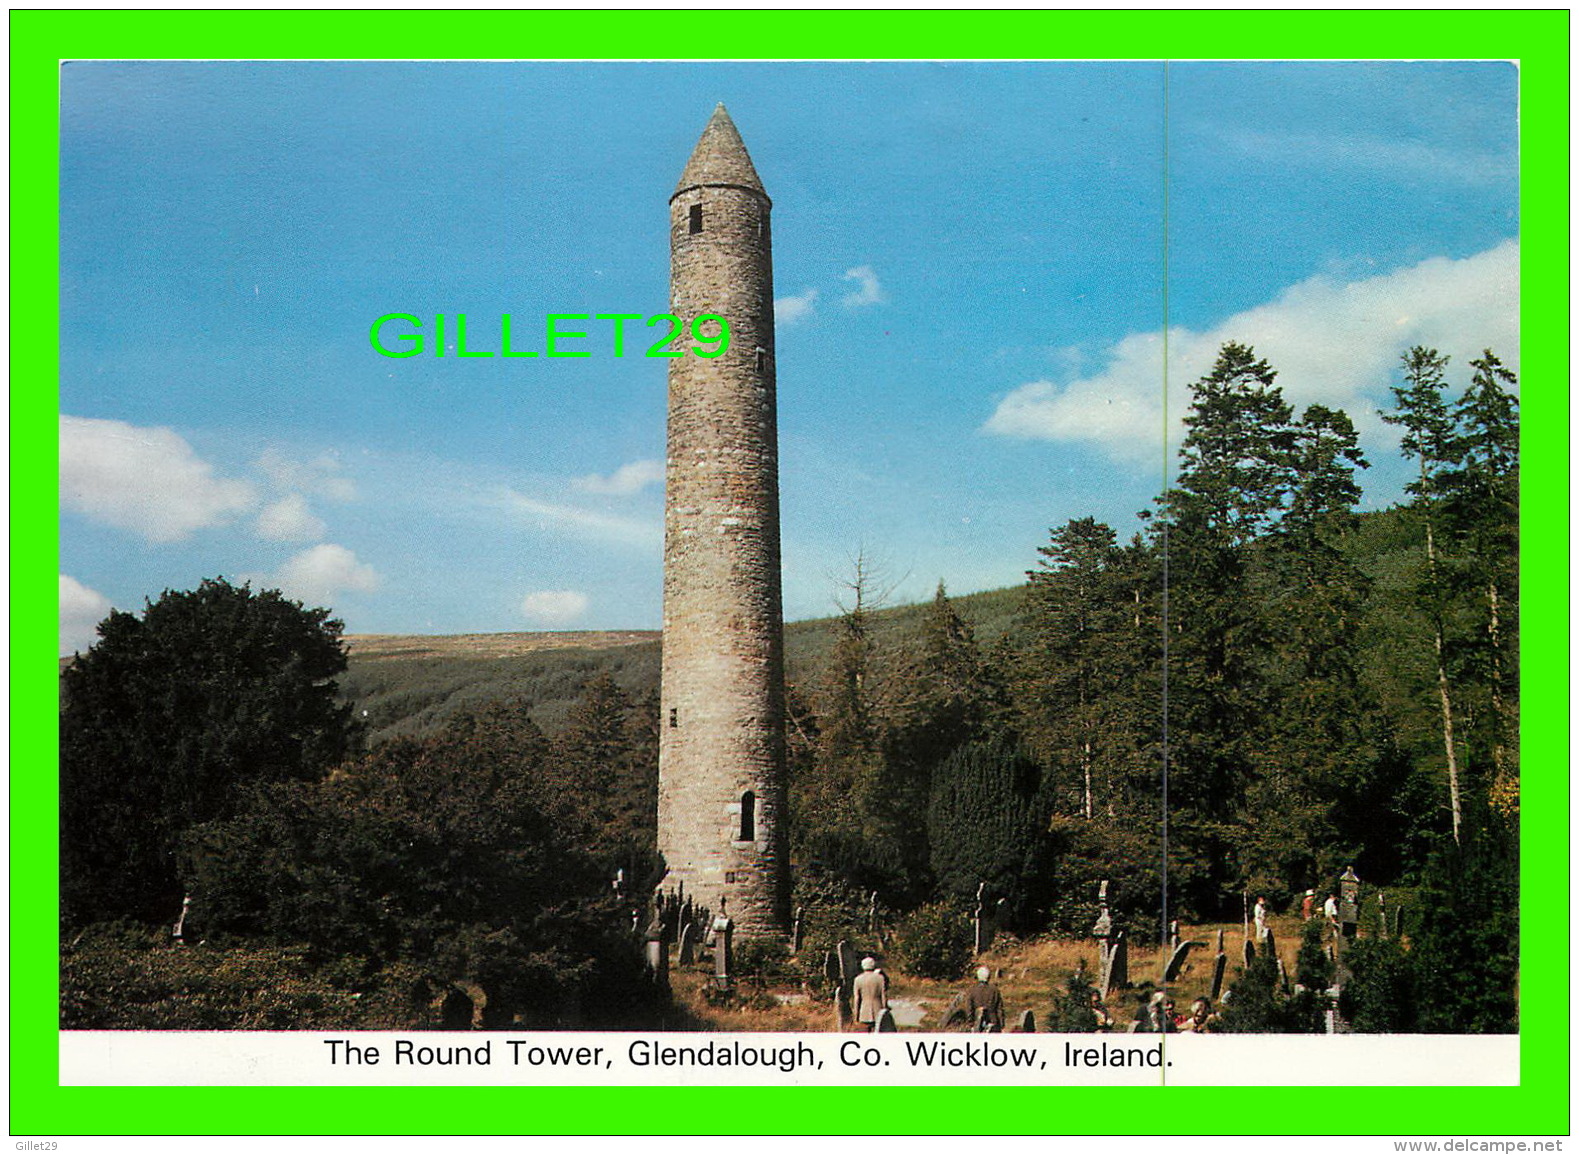 WICKLOW, IRELAND - THE ROUND TOWER, GLENDALOUGH - ANIMATED - CARDALL LTD No 147 - - Wicklow